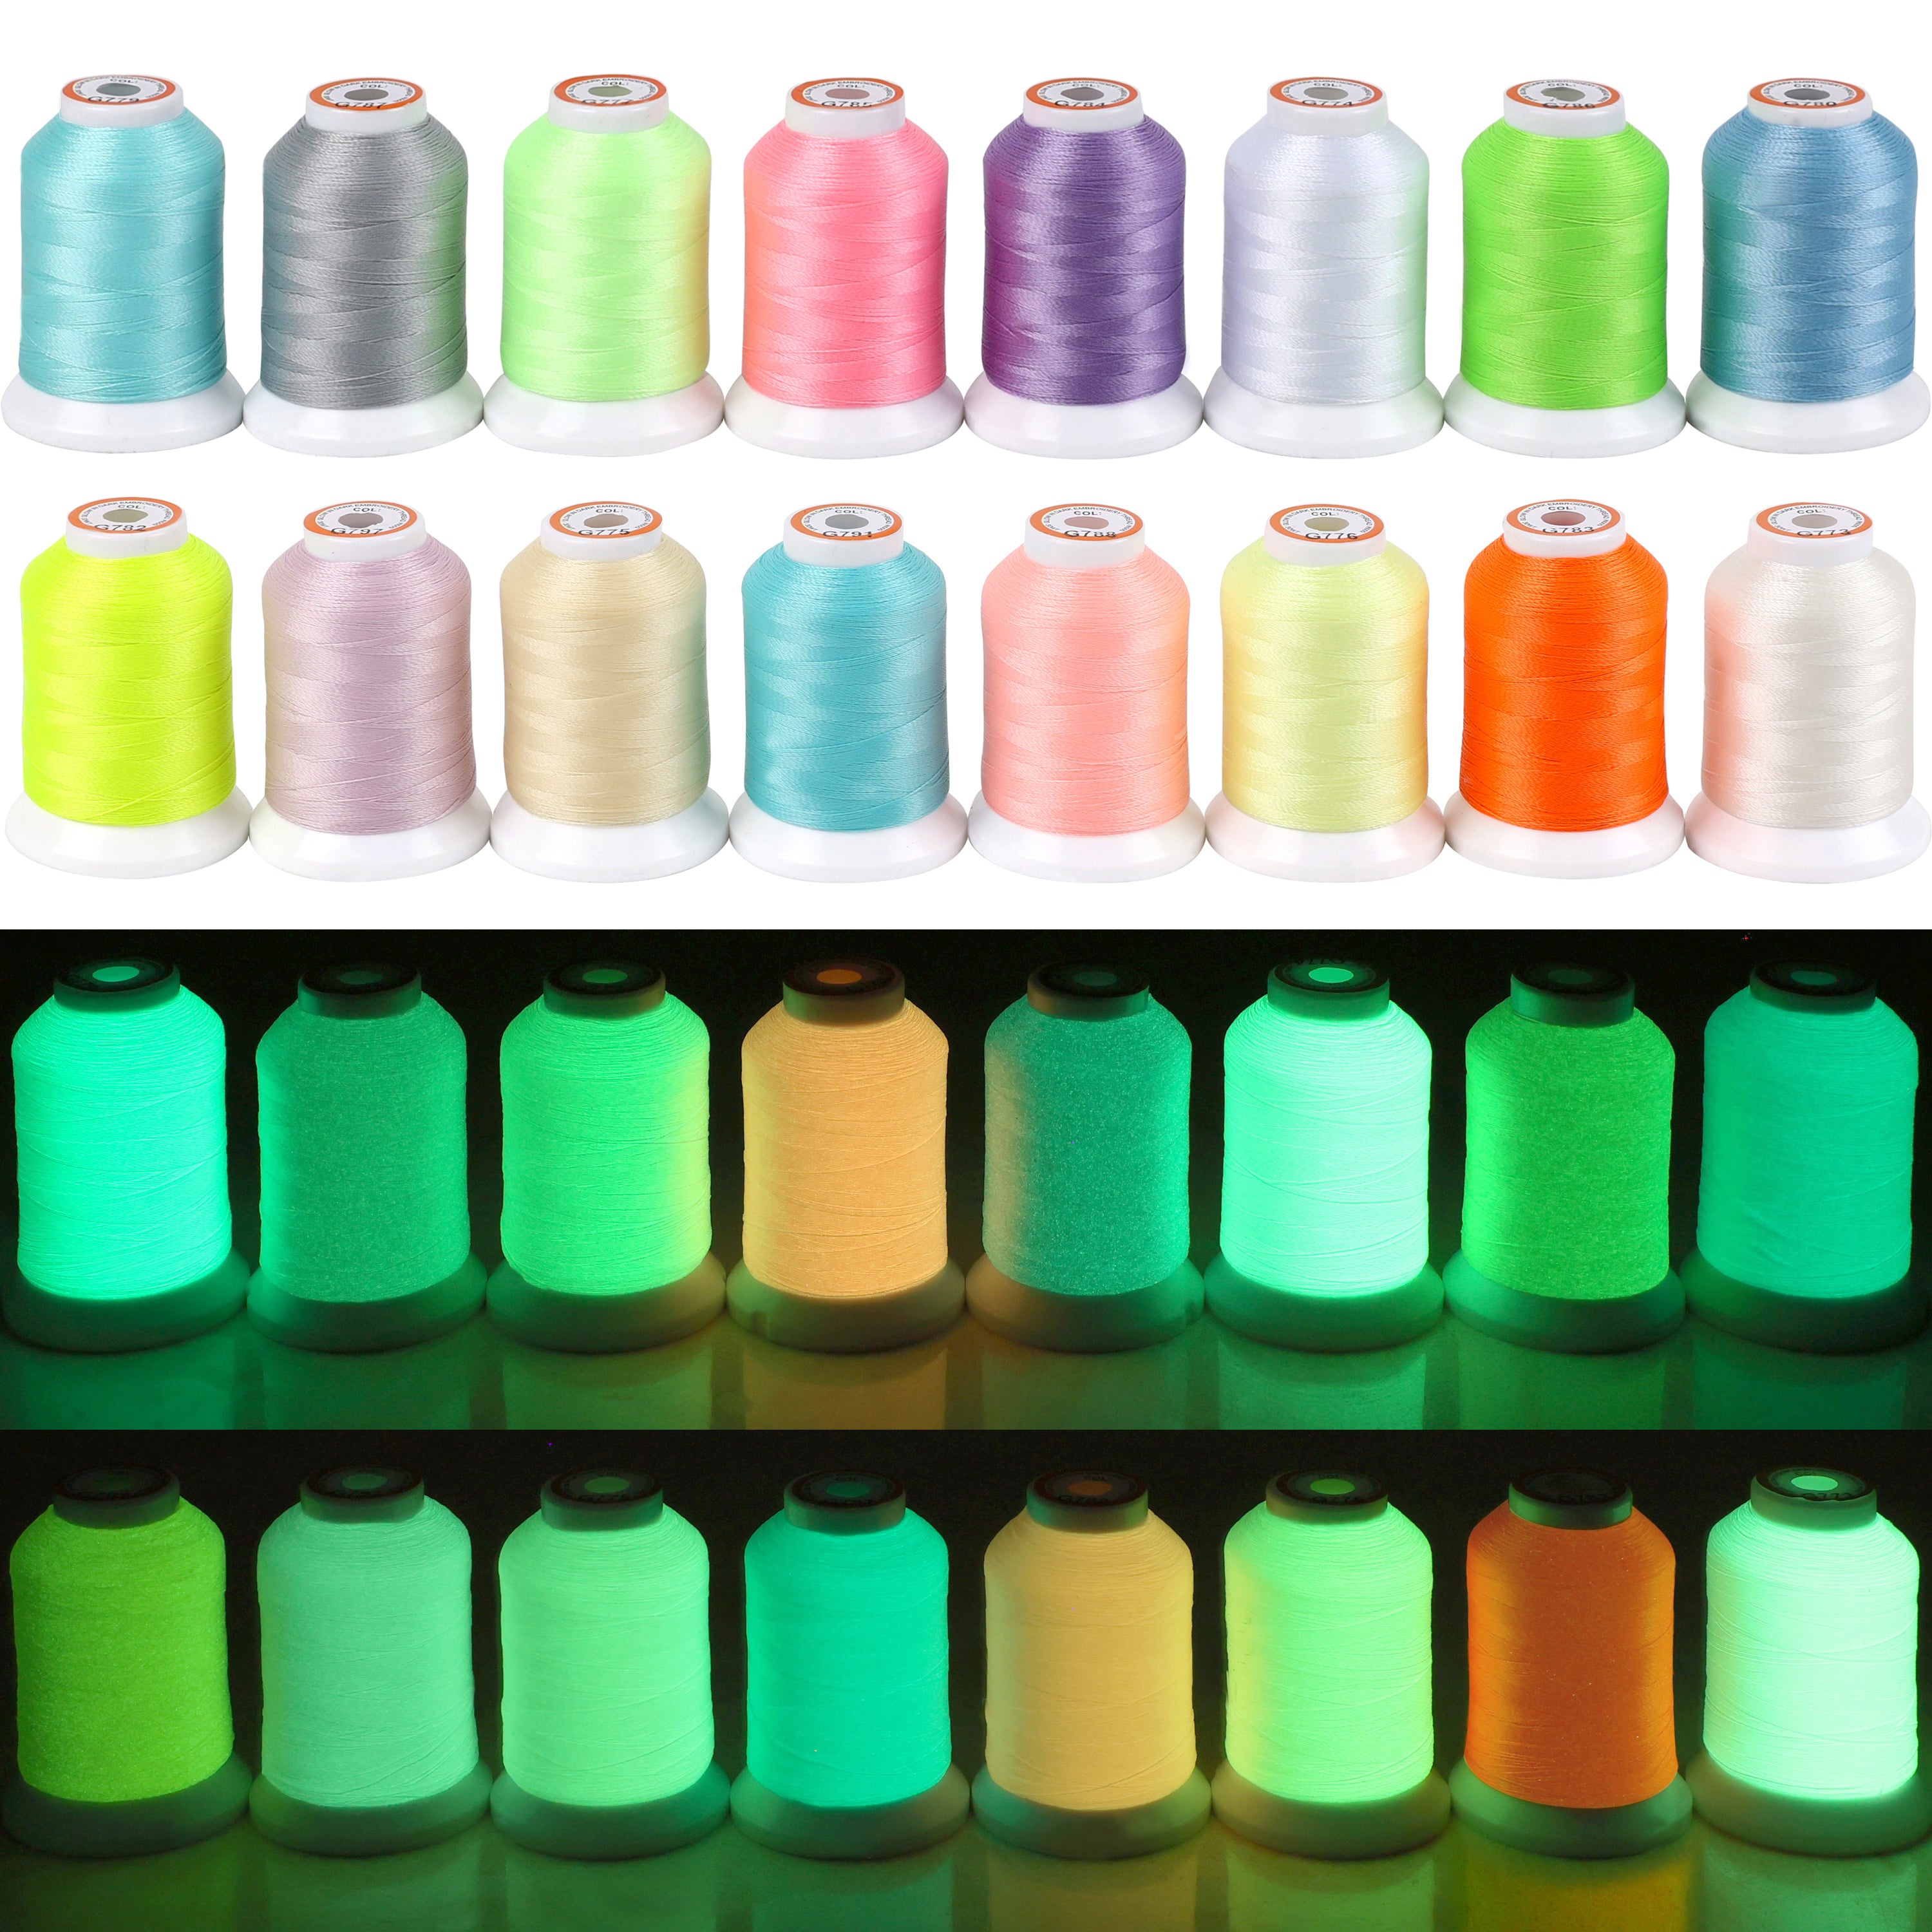 New brothread 8 Colors Luminary Glow in The Dark Embroidery